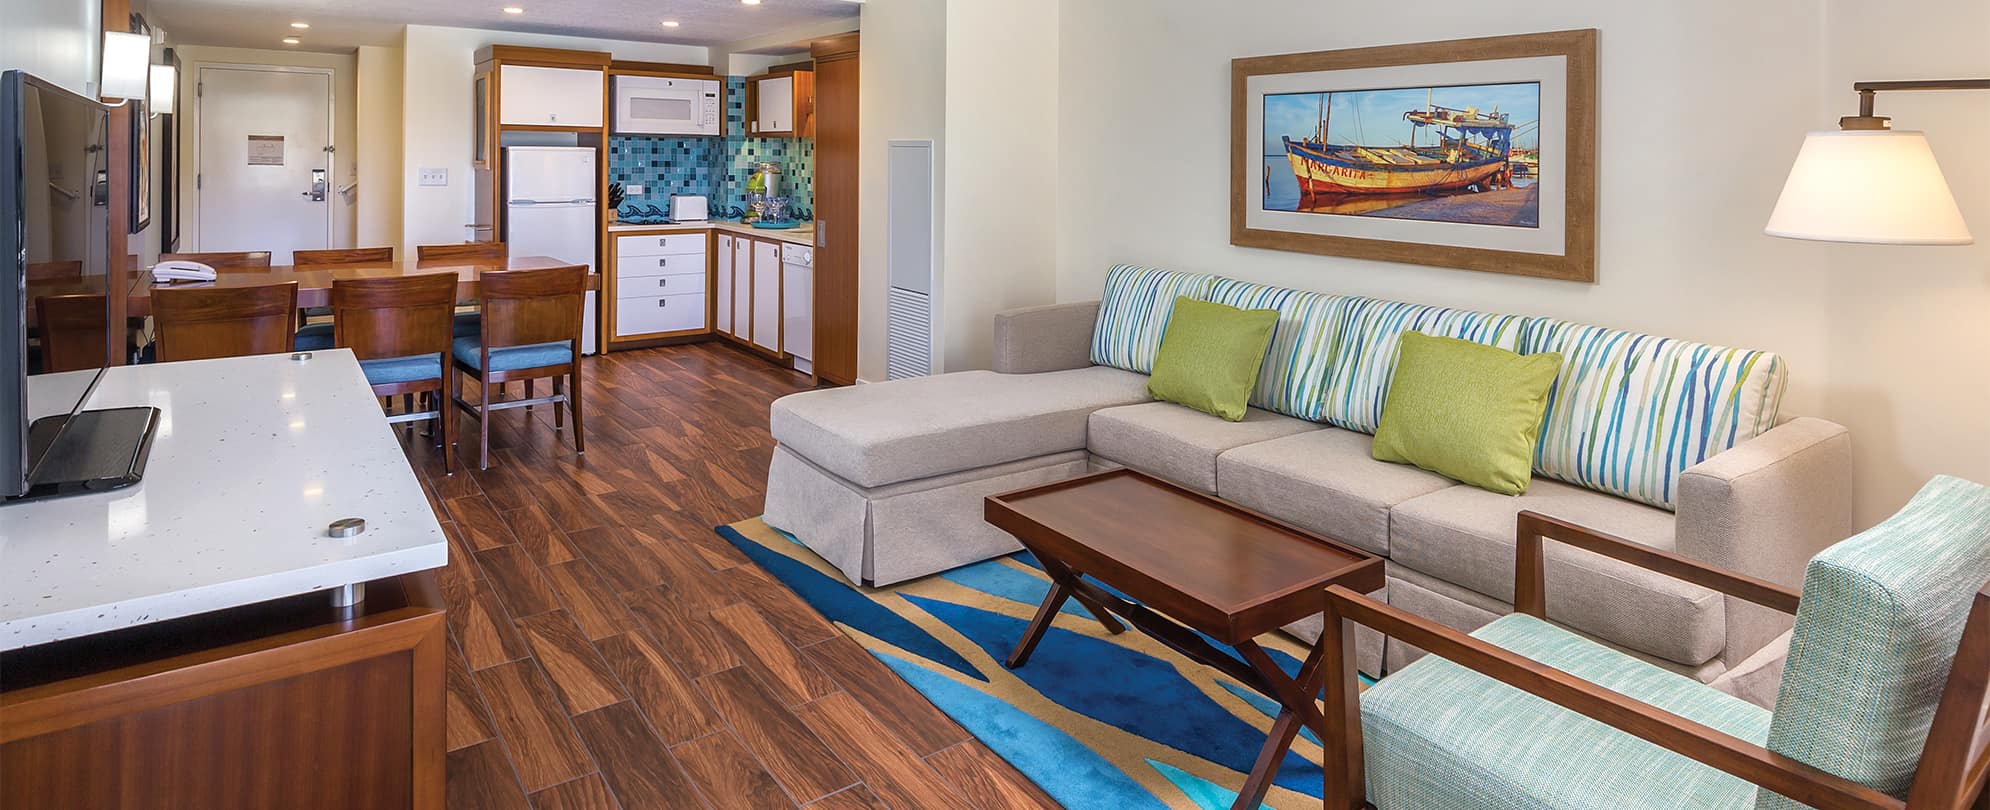 Living room, dining room, and kitchen in a Margaritaville Vacation Club by Wyndham - St. Thomas suite.